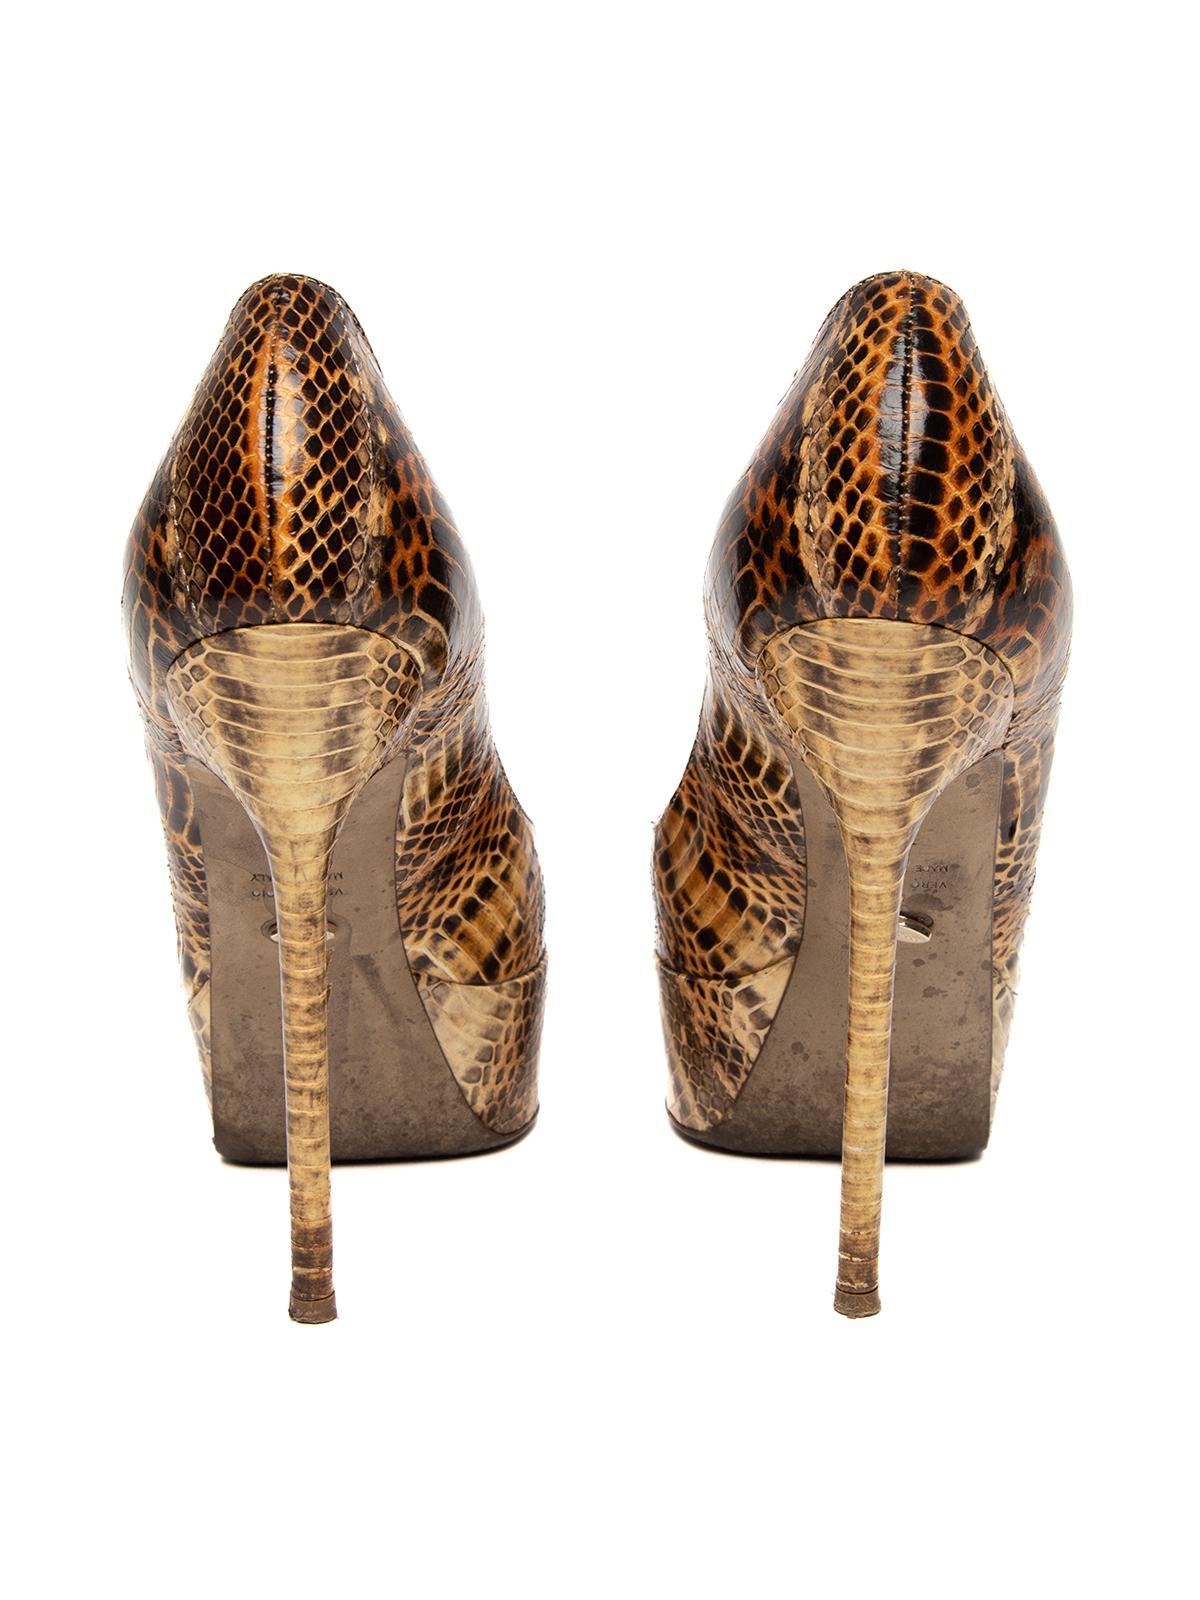 Pre-Loved Sergio Rossi Women's Snakeskin Leather Heels In Fair Condition In London, GB